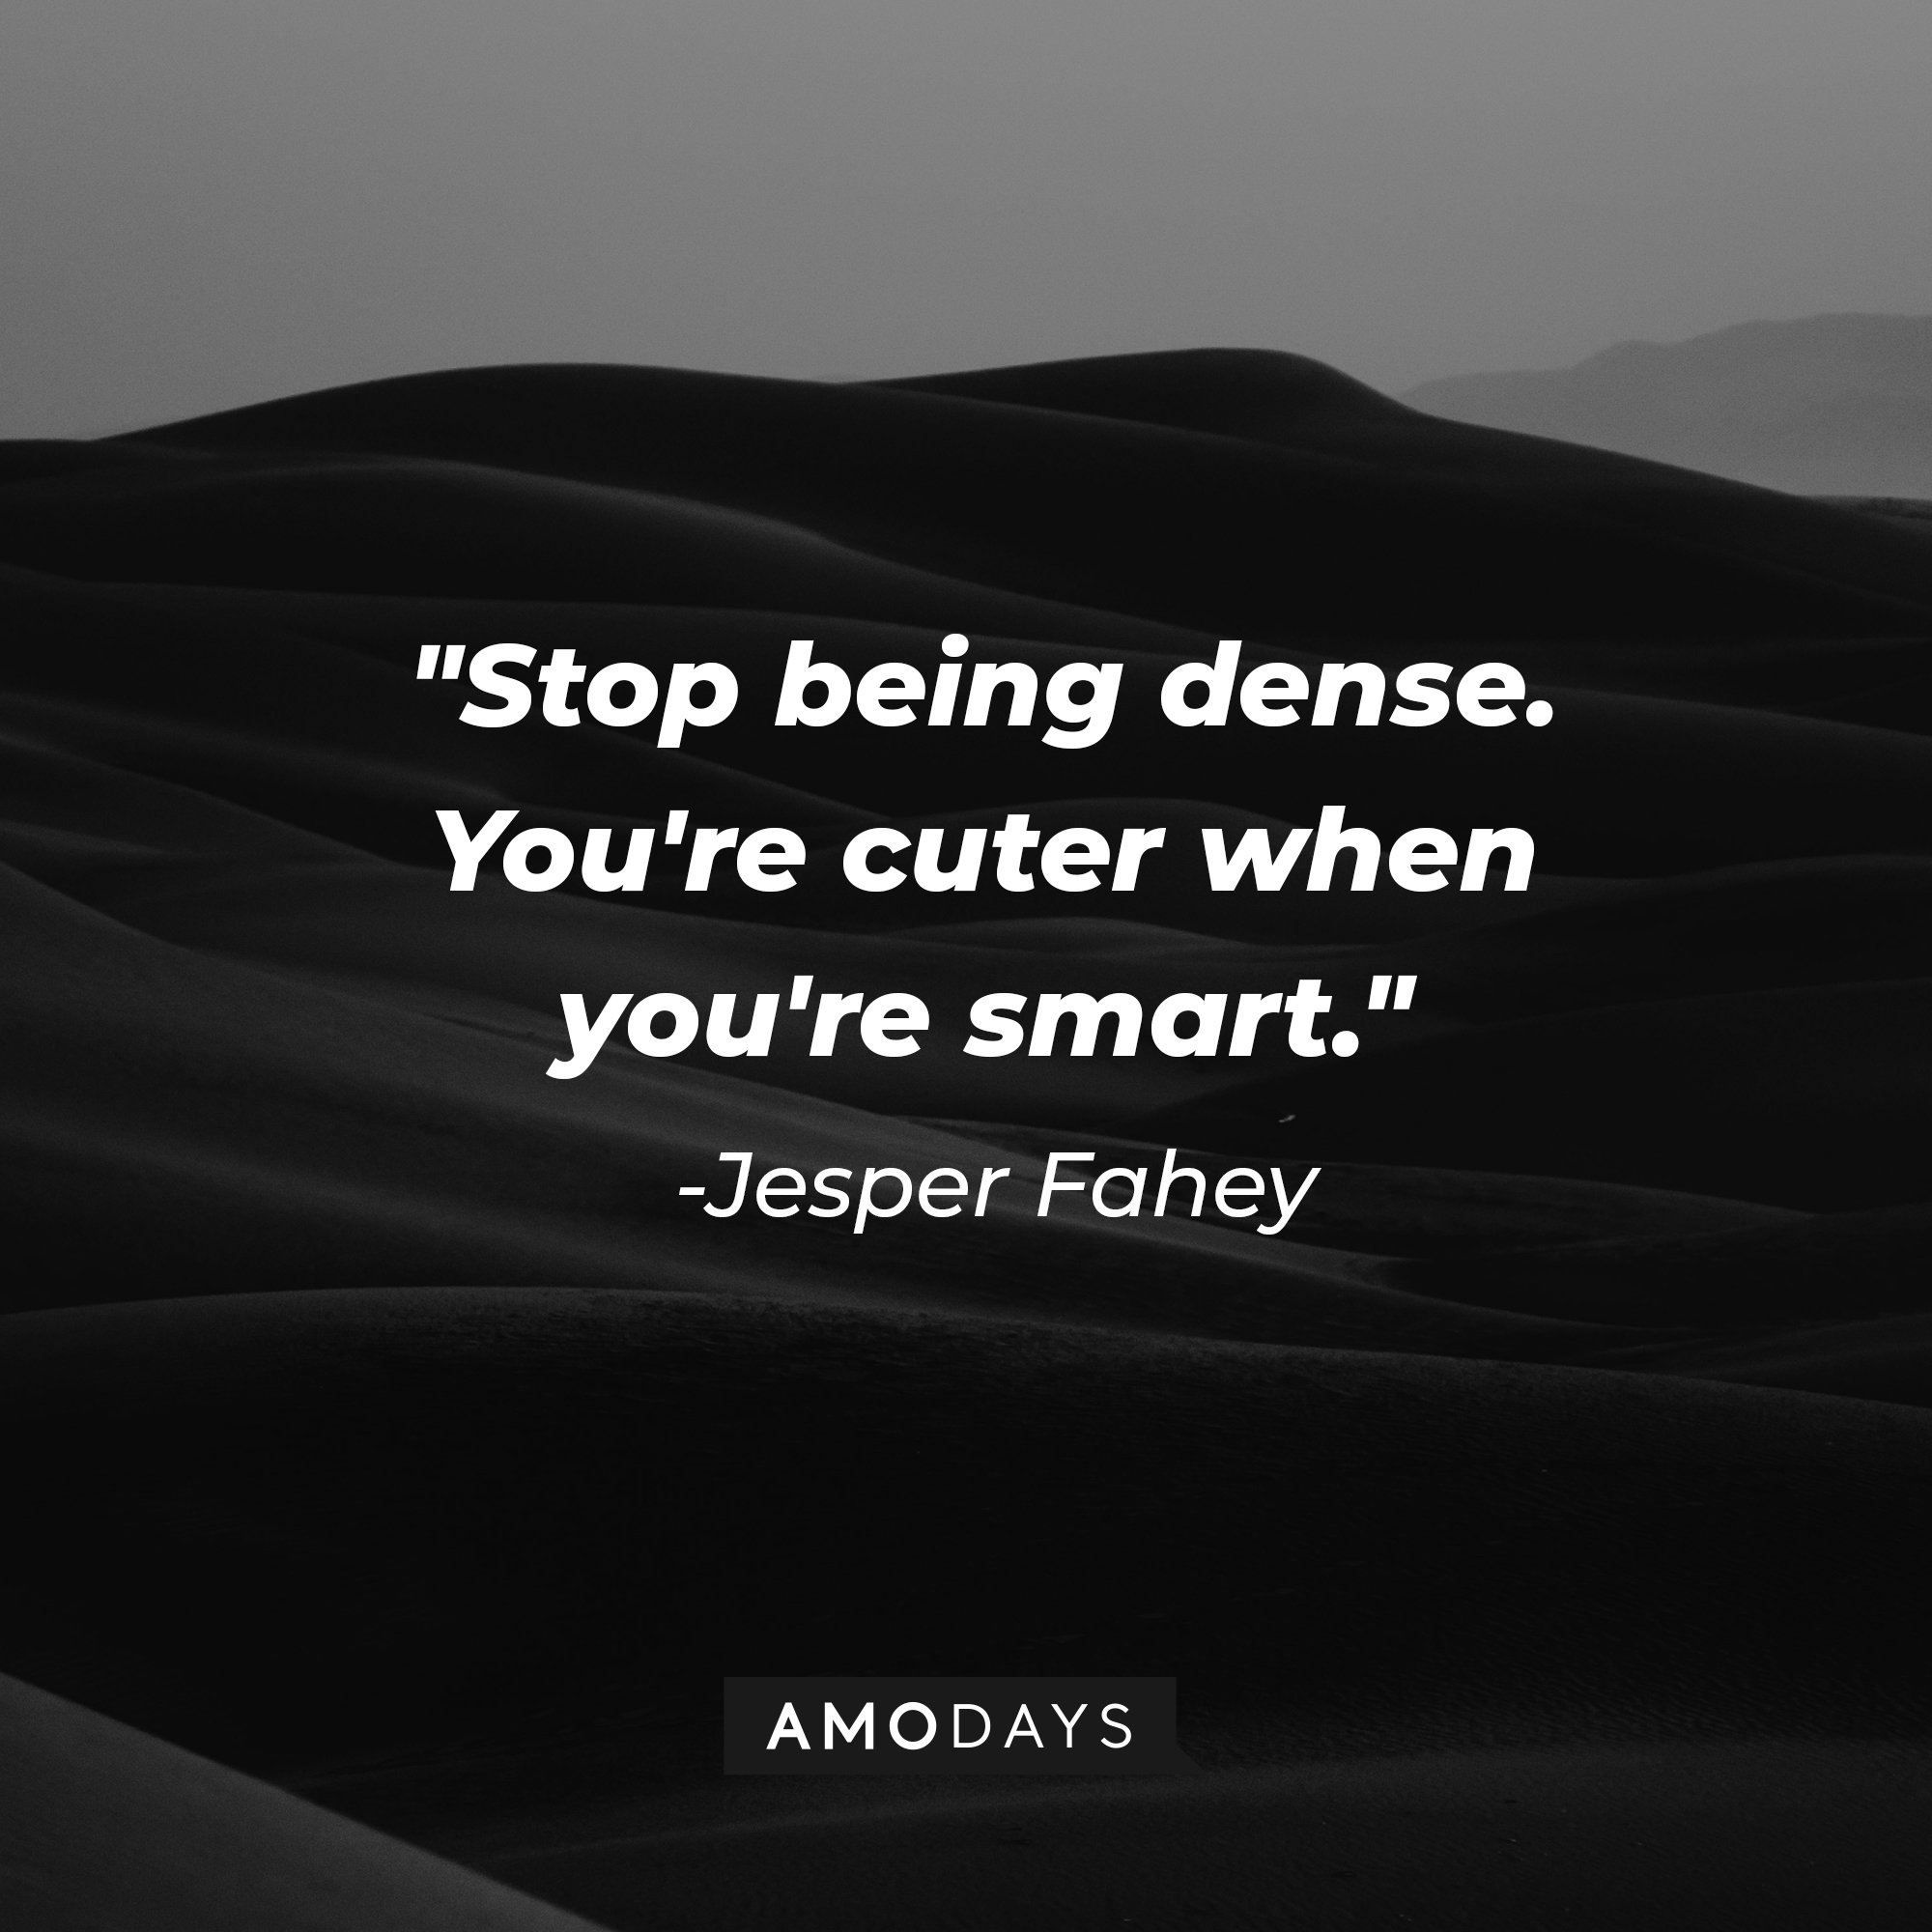 Jesper Fahey’s quote: "Stop being dense. You're cuter when you're smart." | Image: AmoDays